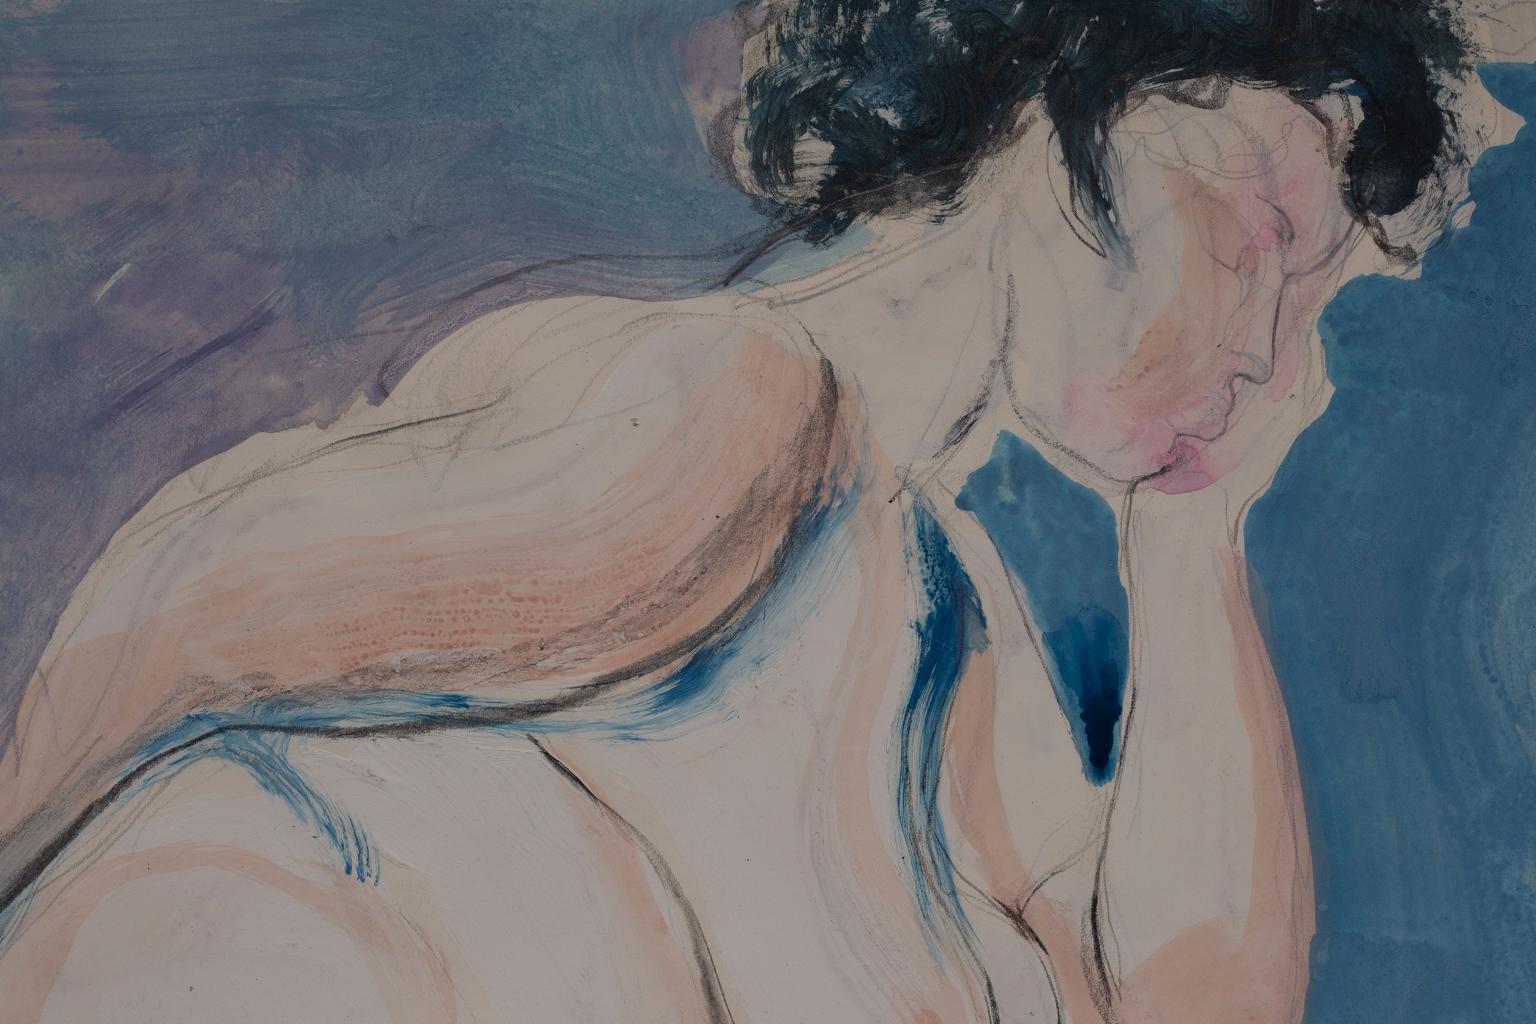 This acrylic and graphite on paper from the seminal artist Artis Lane is one of the many model paintings from her long and illustrious career. The subject is a large woman who is bent over in pose. Artis Lane, in her many nudes, chose to depict a